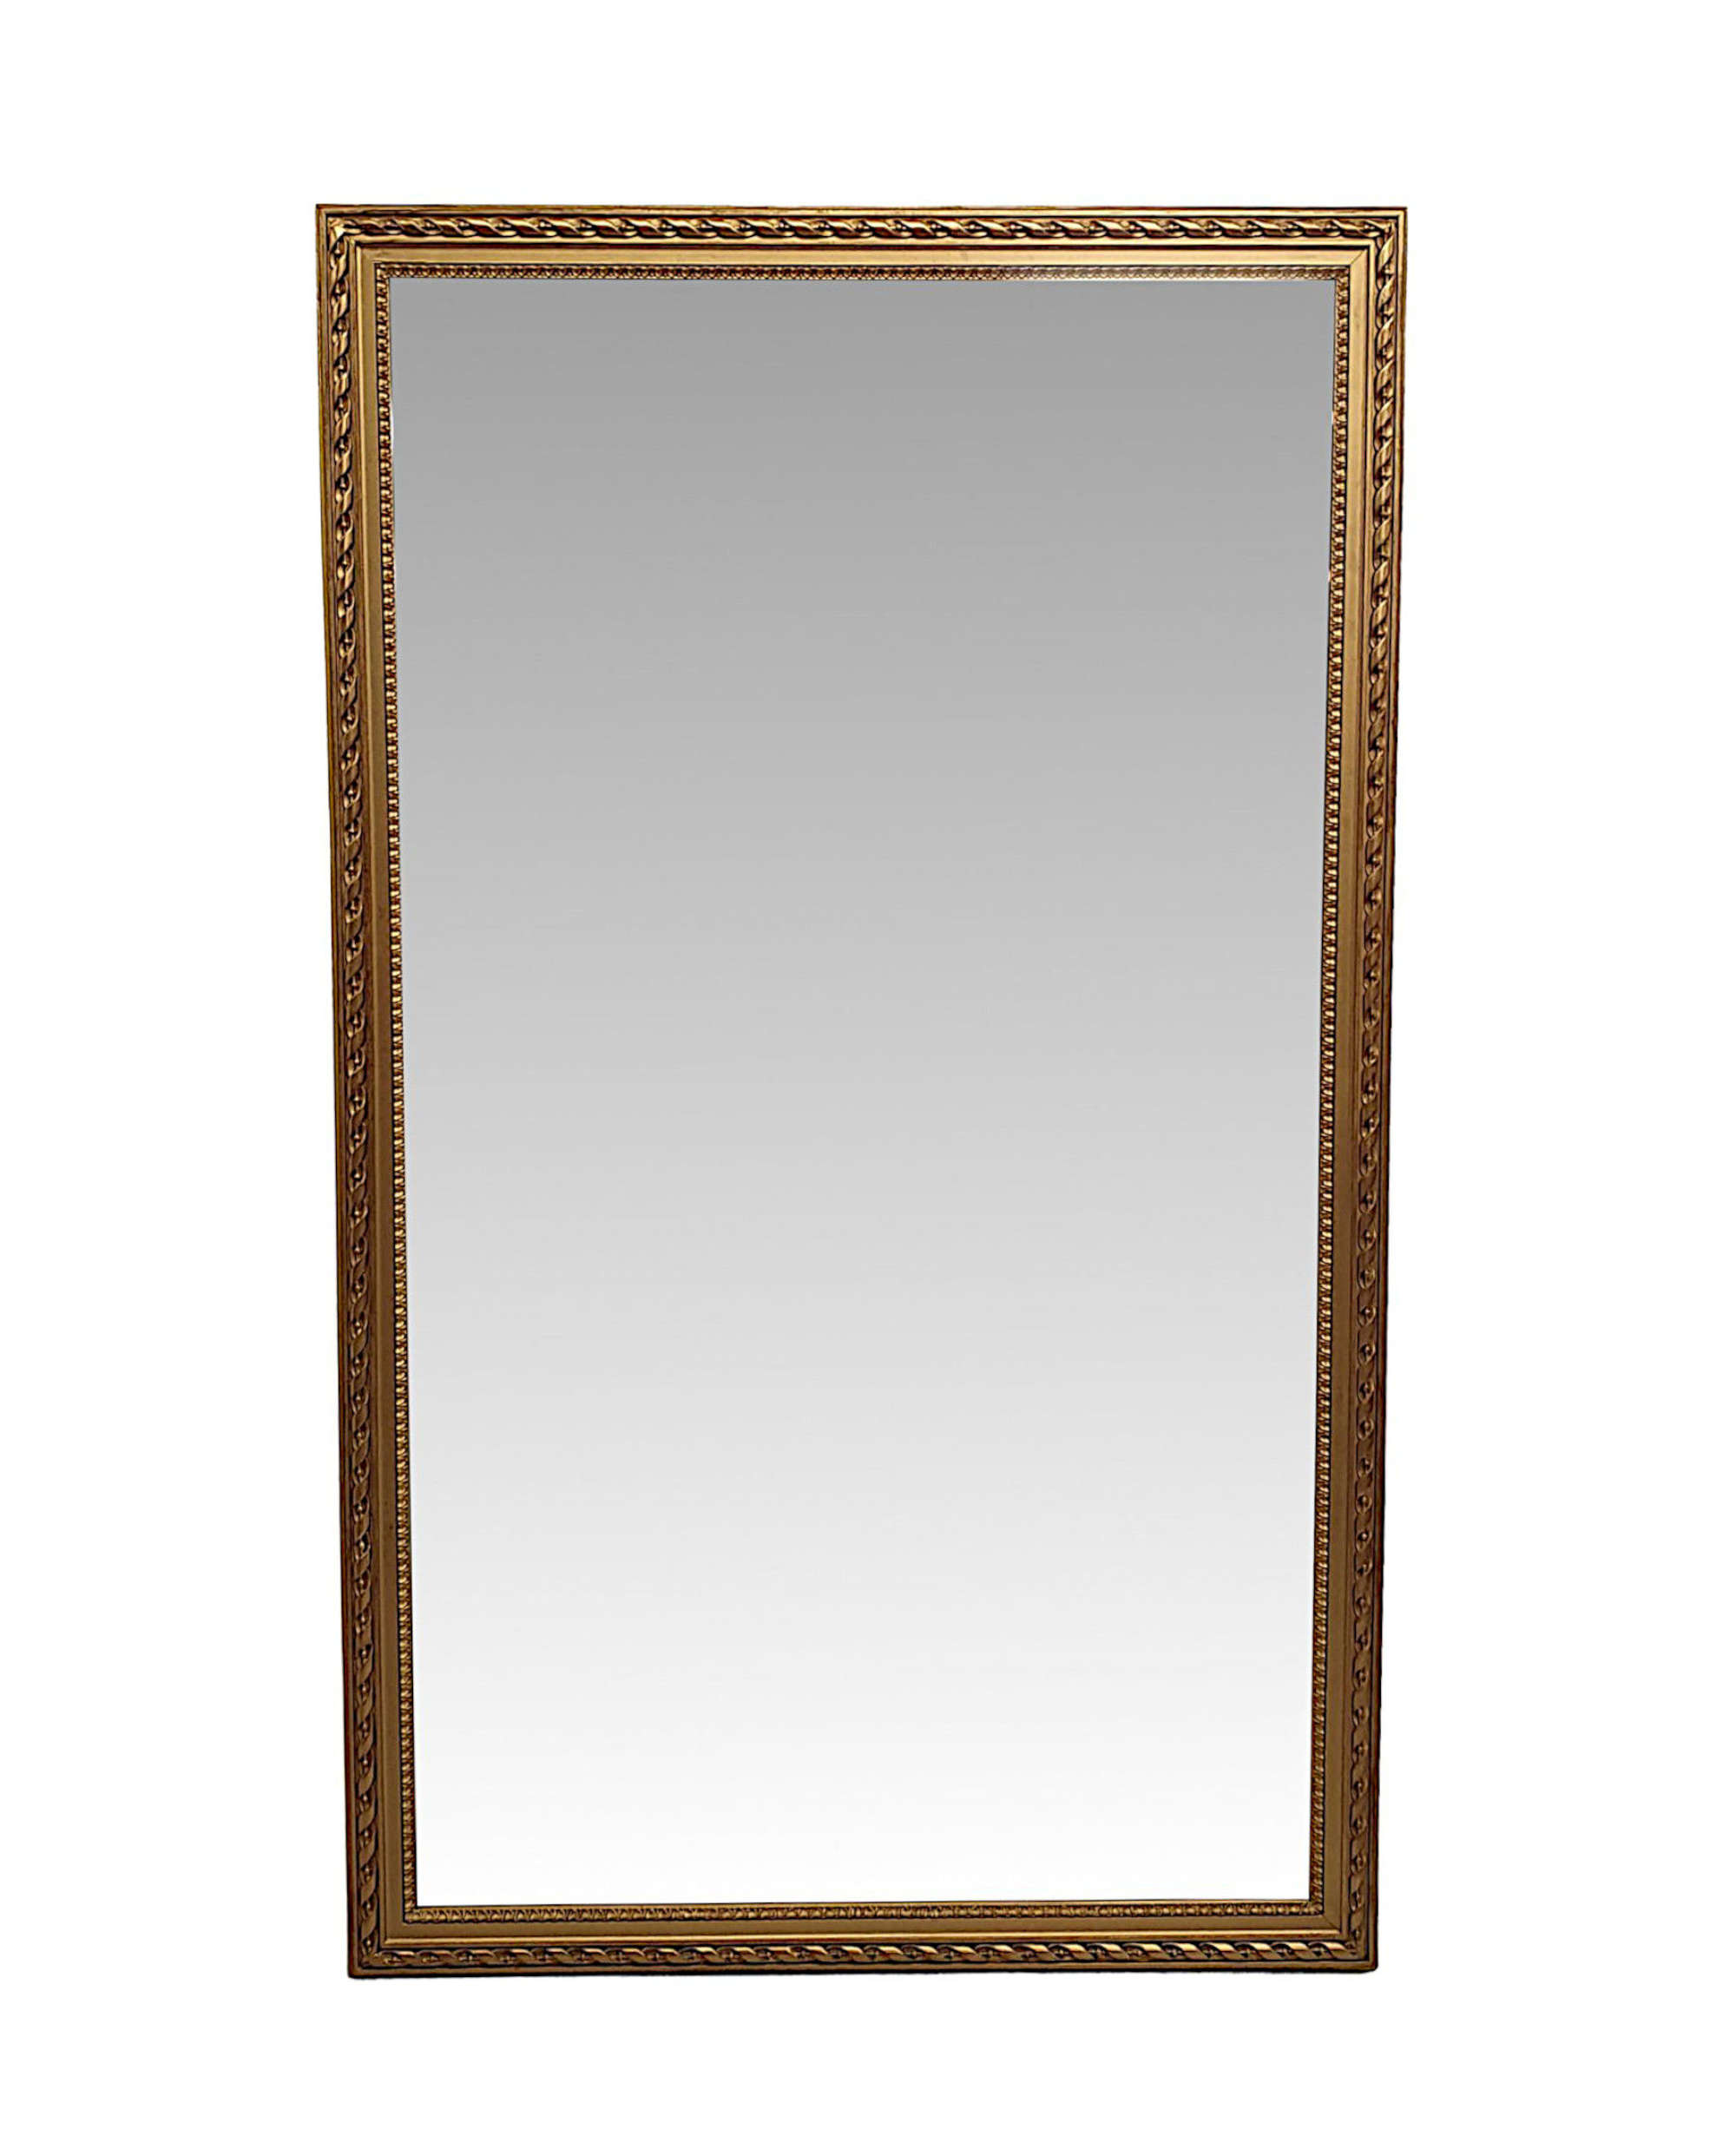 A Very Fine and Elegant 19th Century Giltwood Mirror